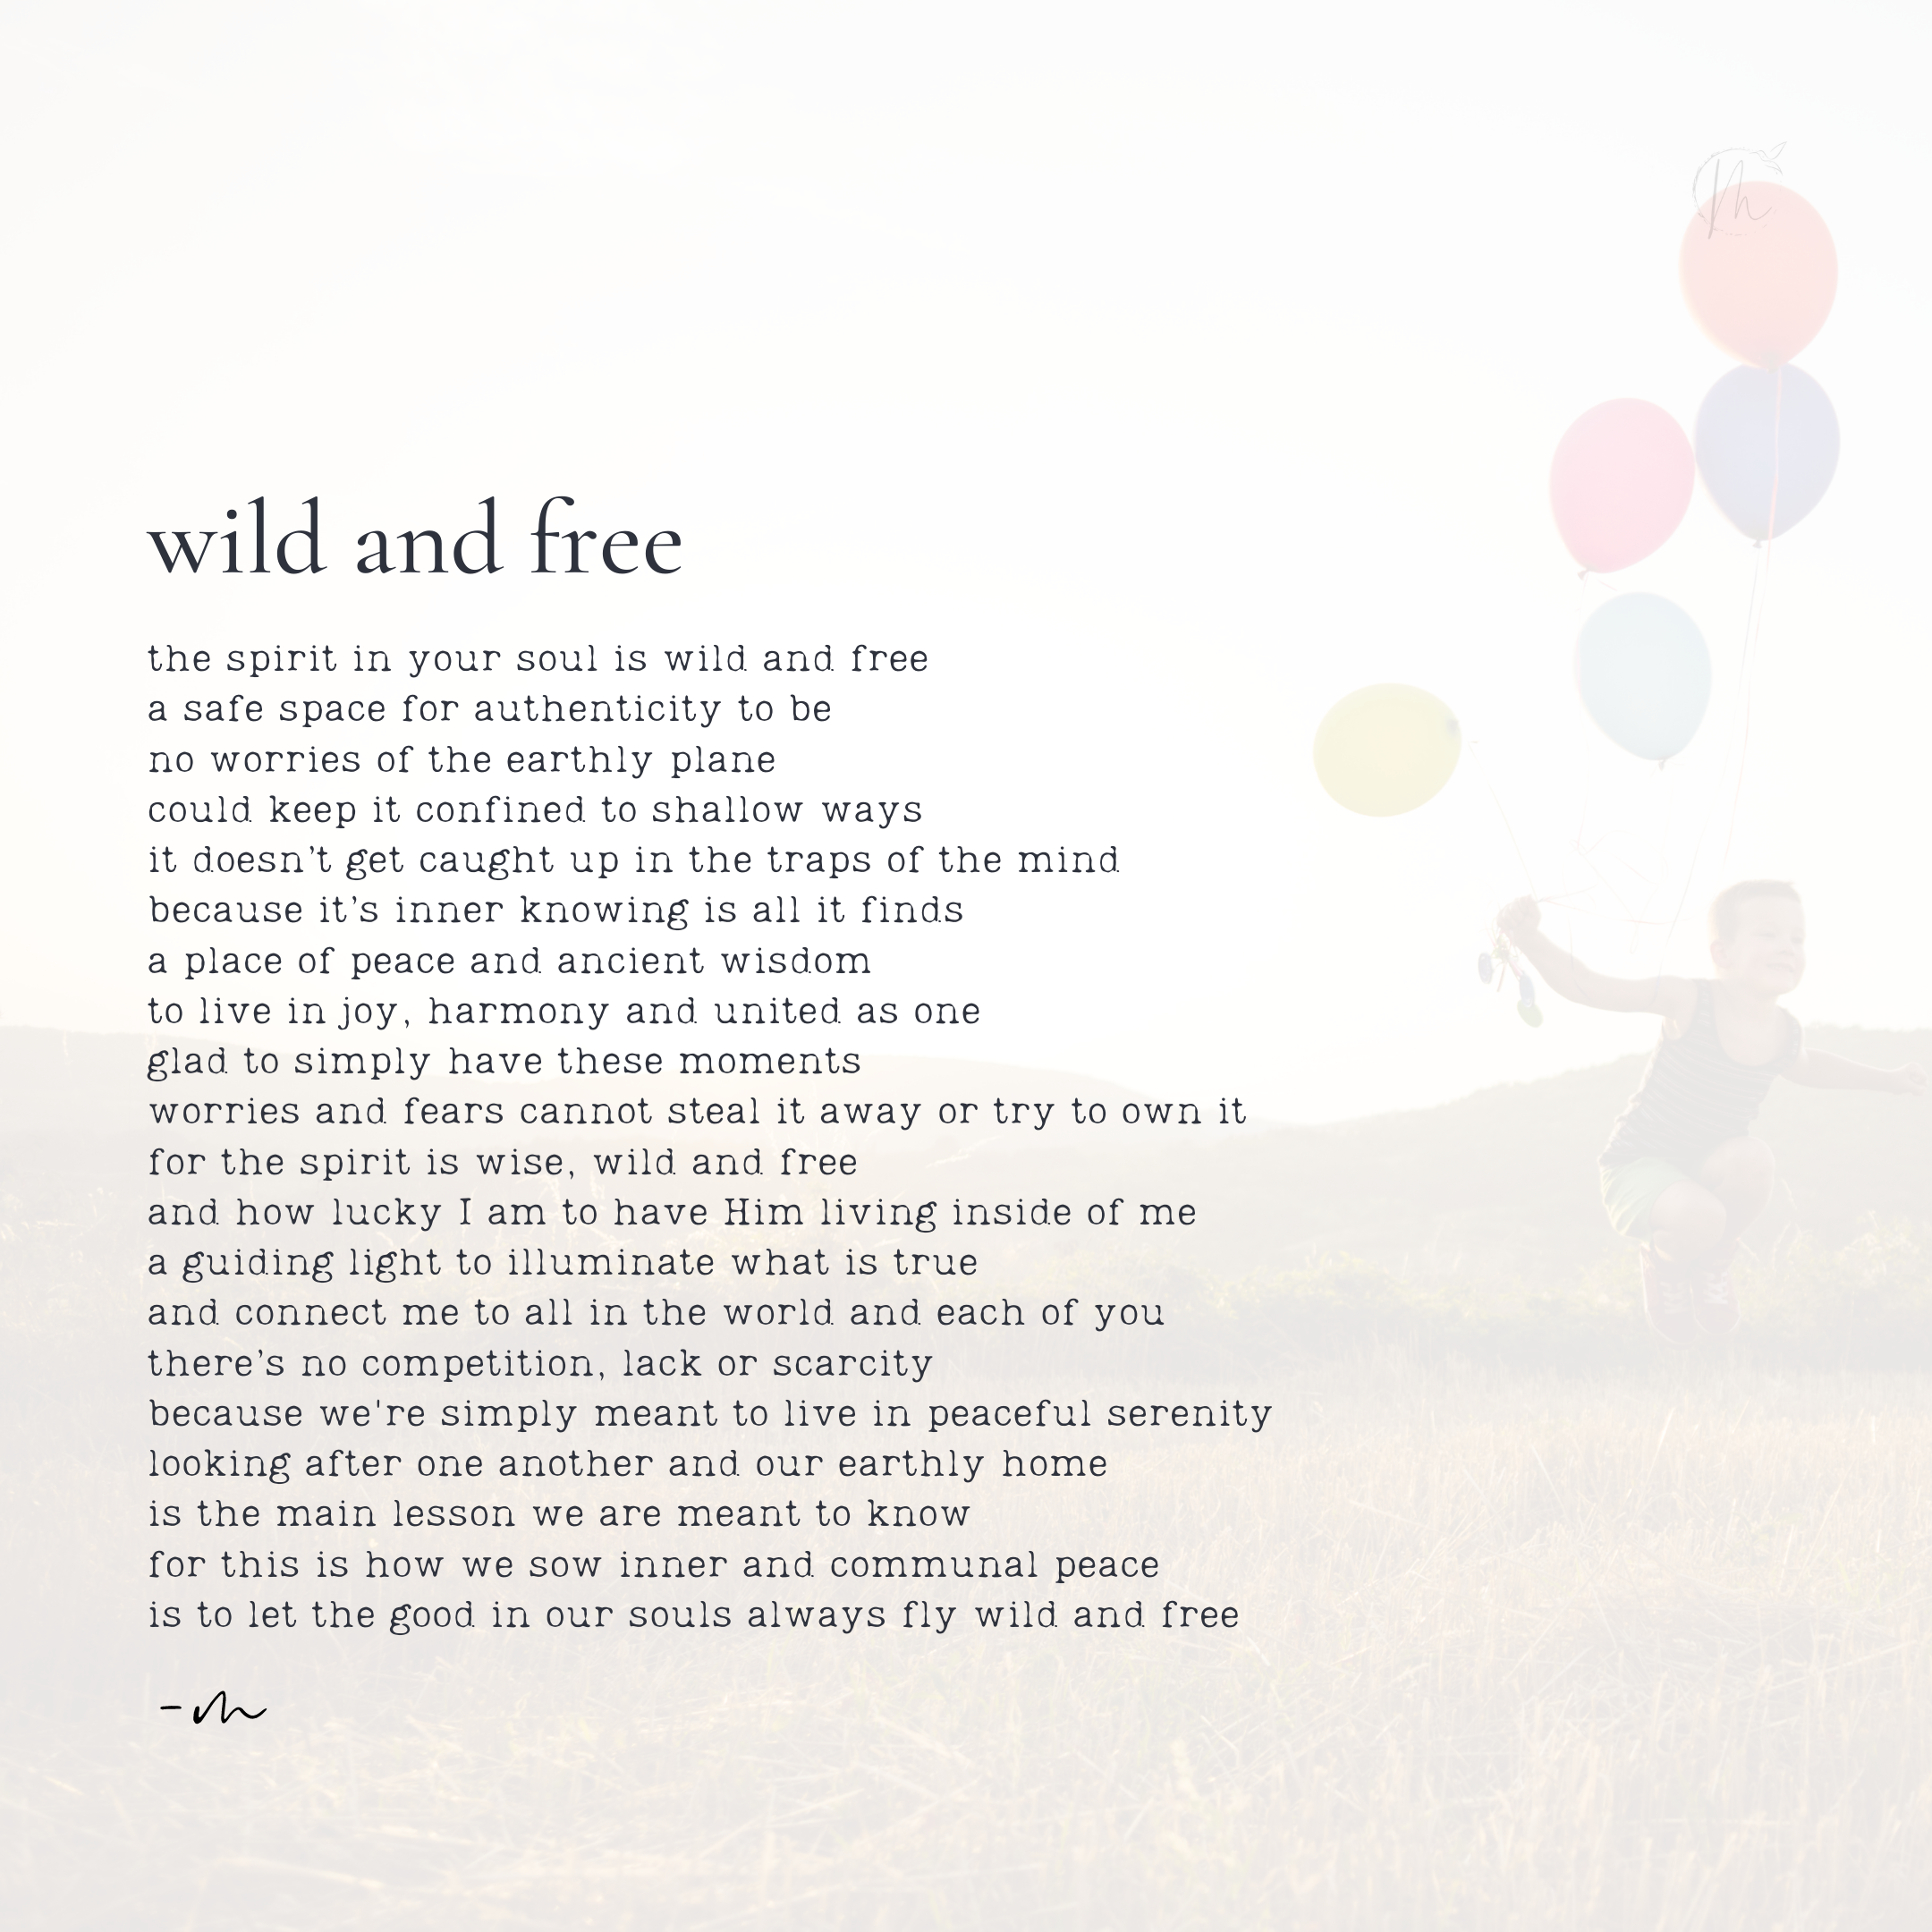 poem - wild and free with photo.png